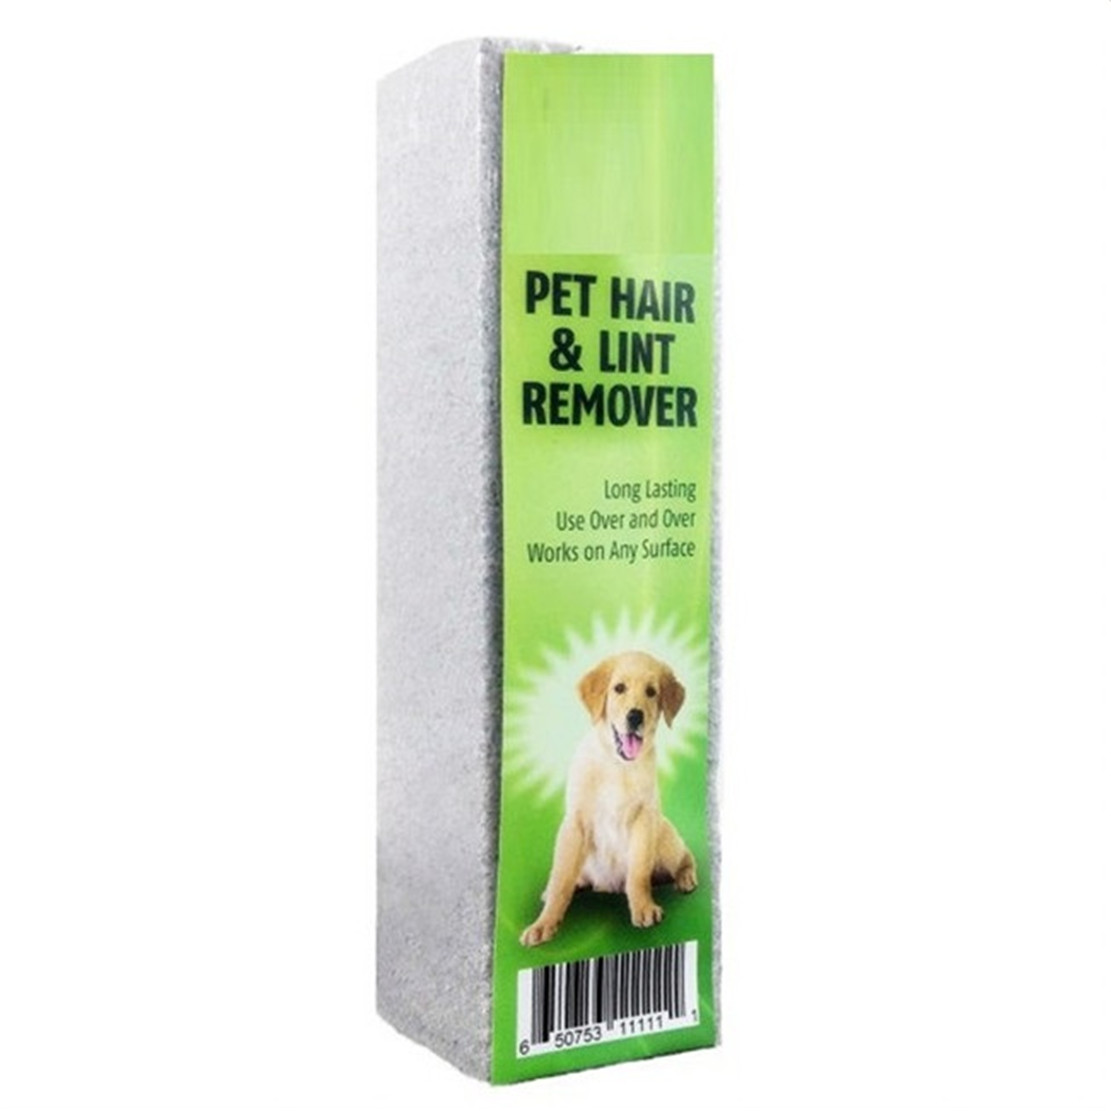 Pet hair removal pumice stone & rock